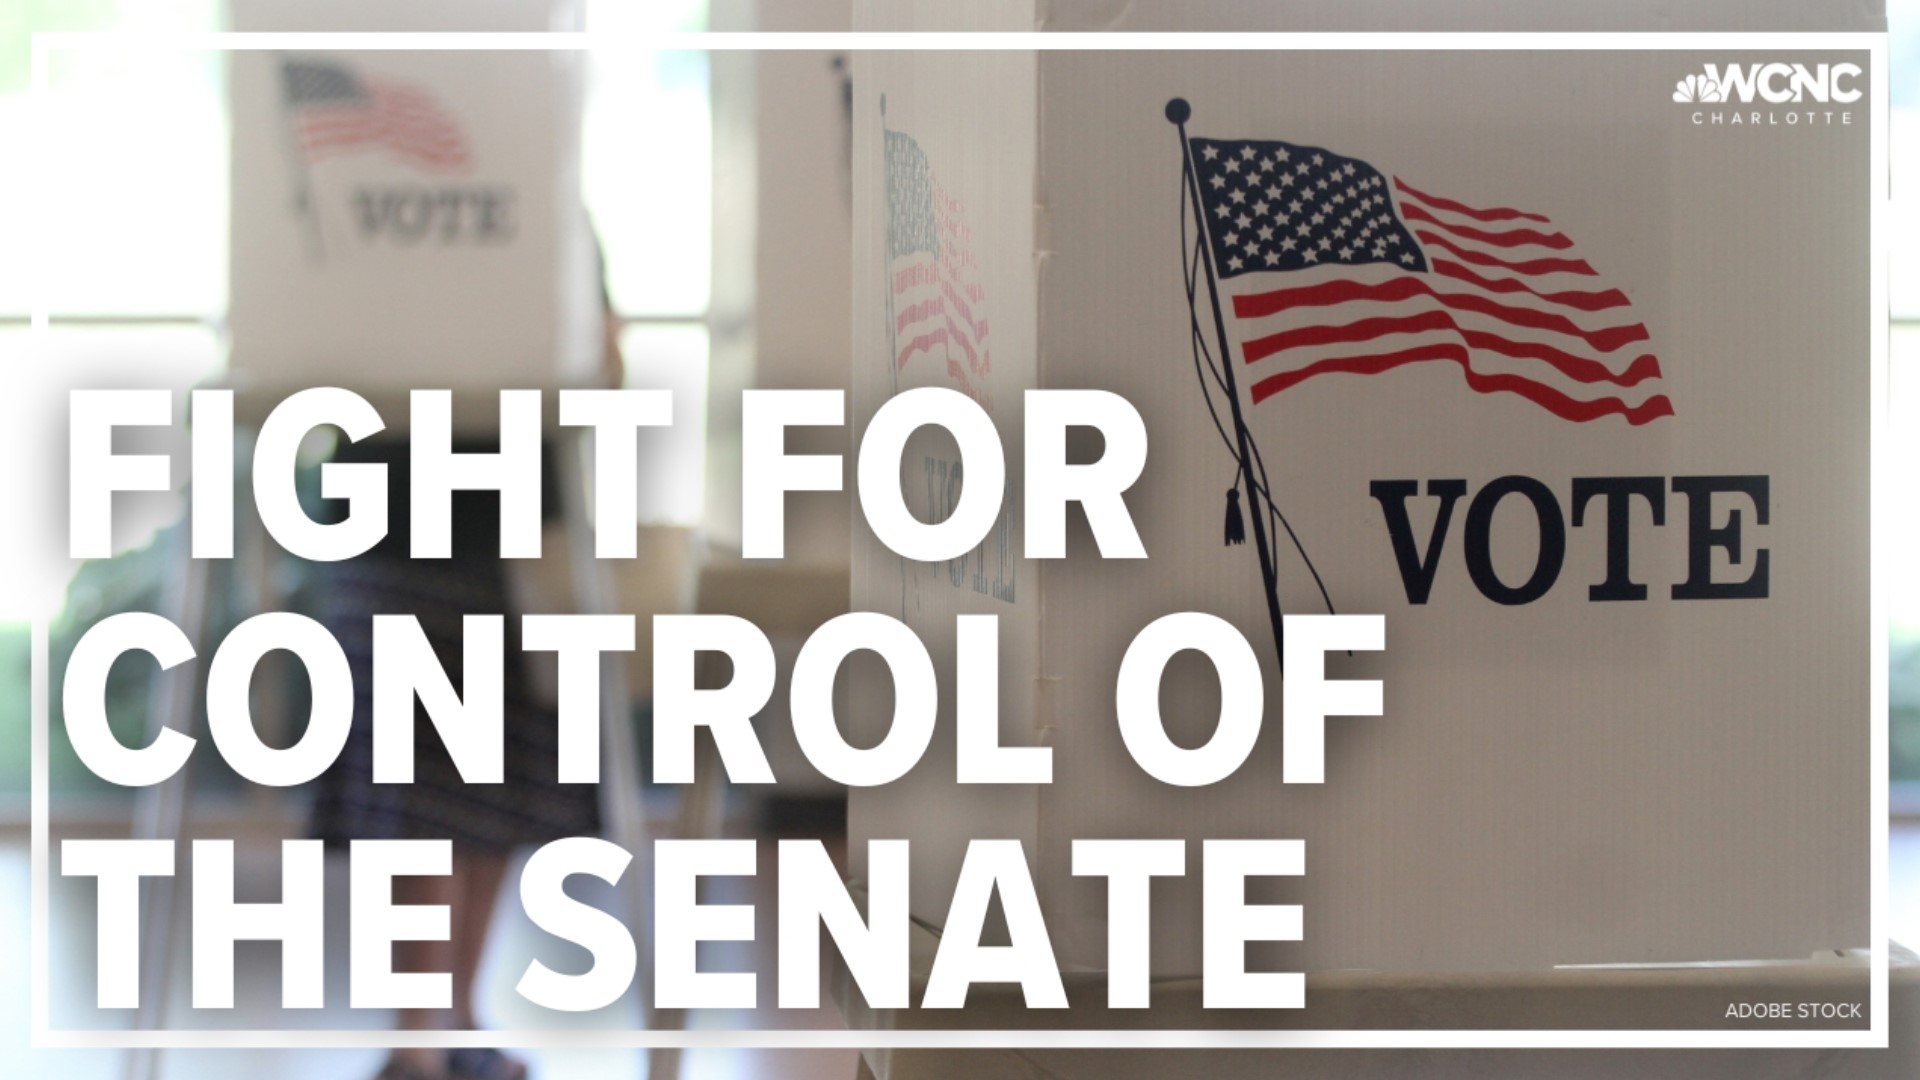 Republicans and Democrats are in a fierce fight for control of the evenly-divided senate.